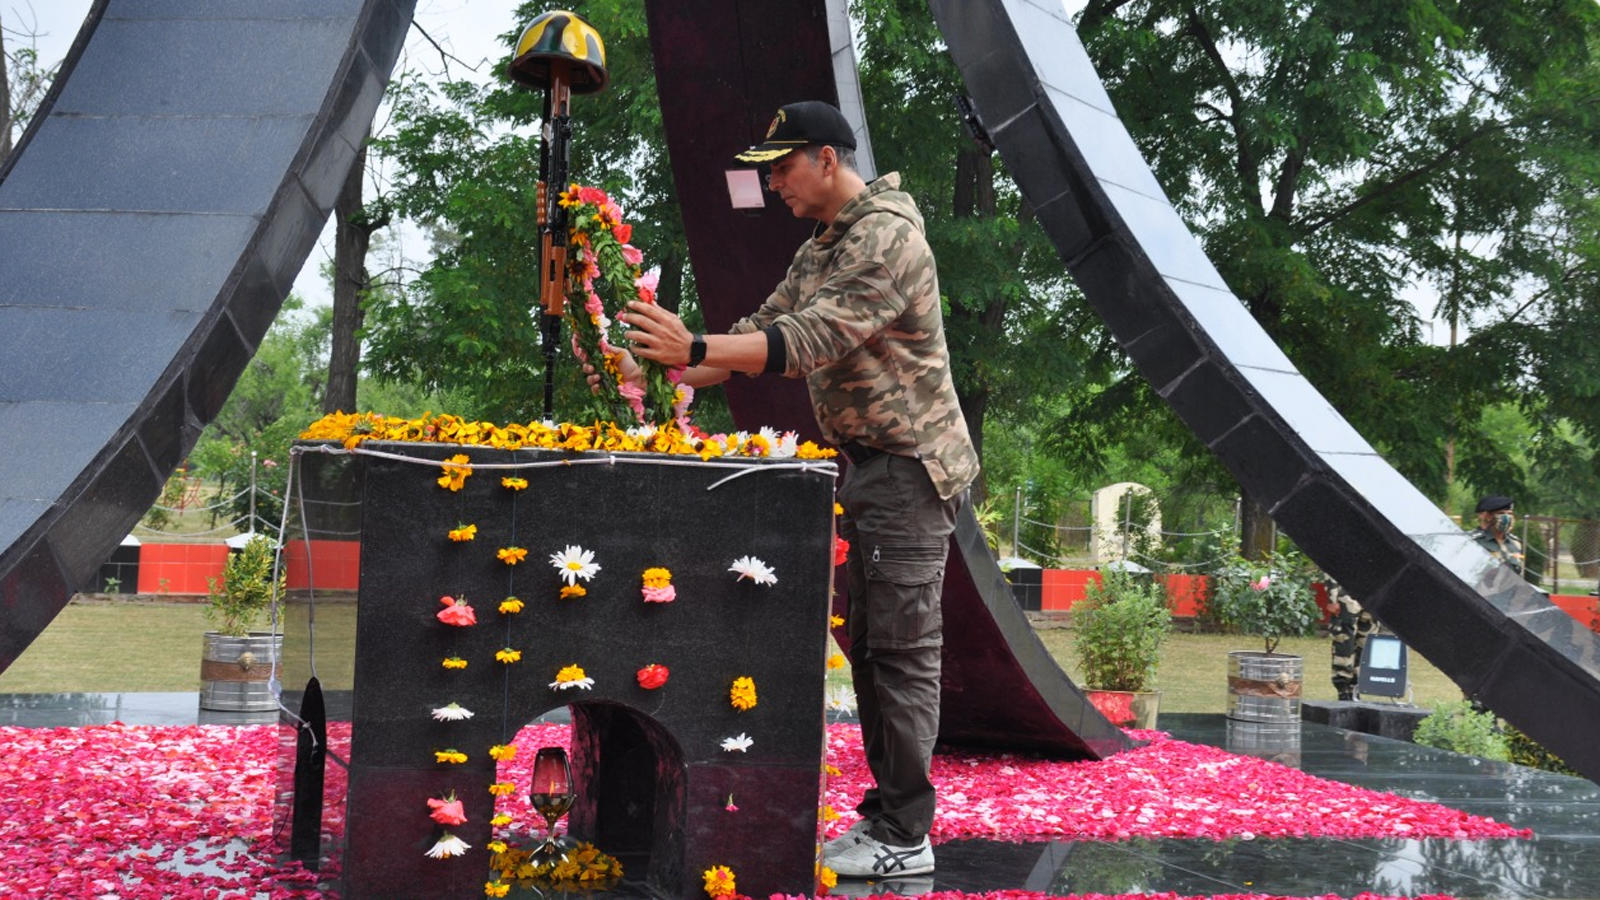 Akshay Kumar meets BSF troops guarding the LoC in Kashmir, pays homage to martyrs | Hindi Movie News - Bollywood - Times of India